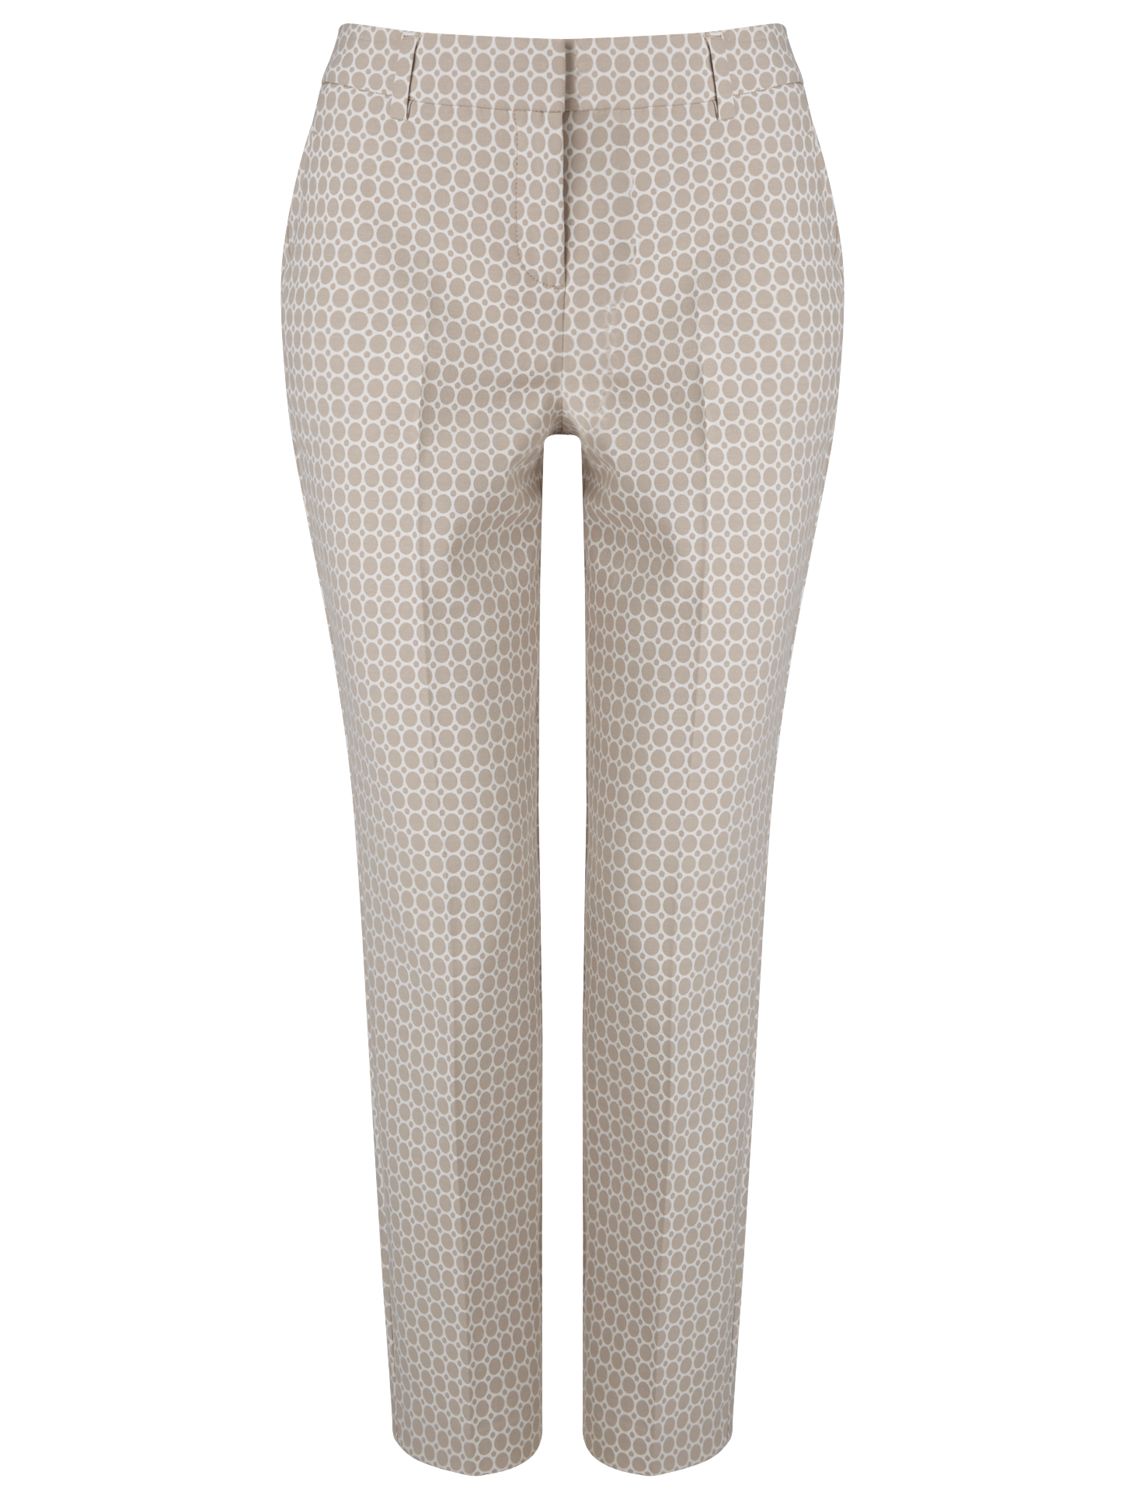 Phase Eight Alice Circle Trousers, Ivory/Stone at John Lewis & Partners